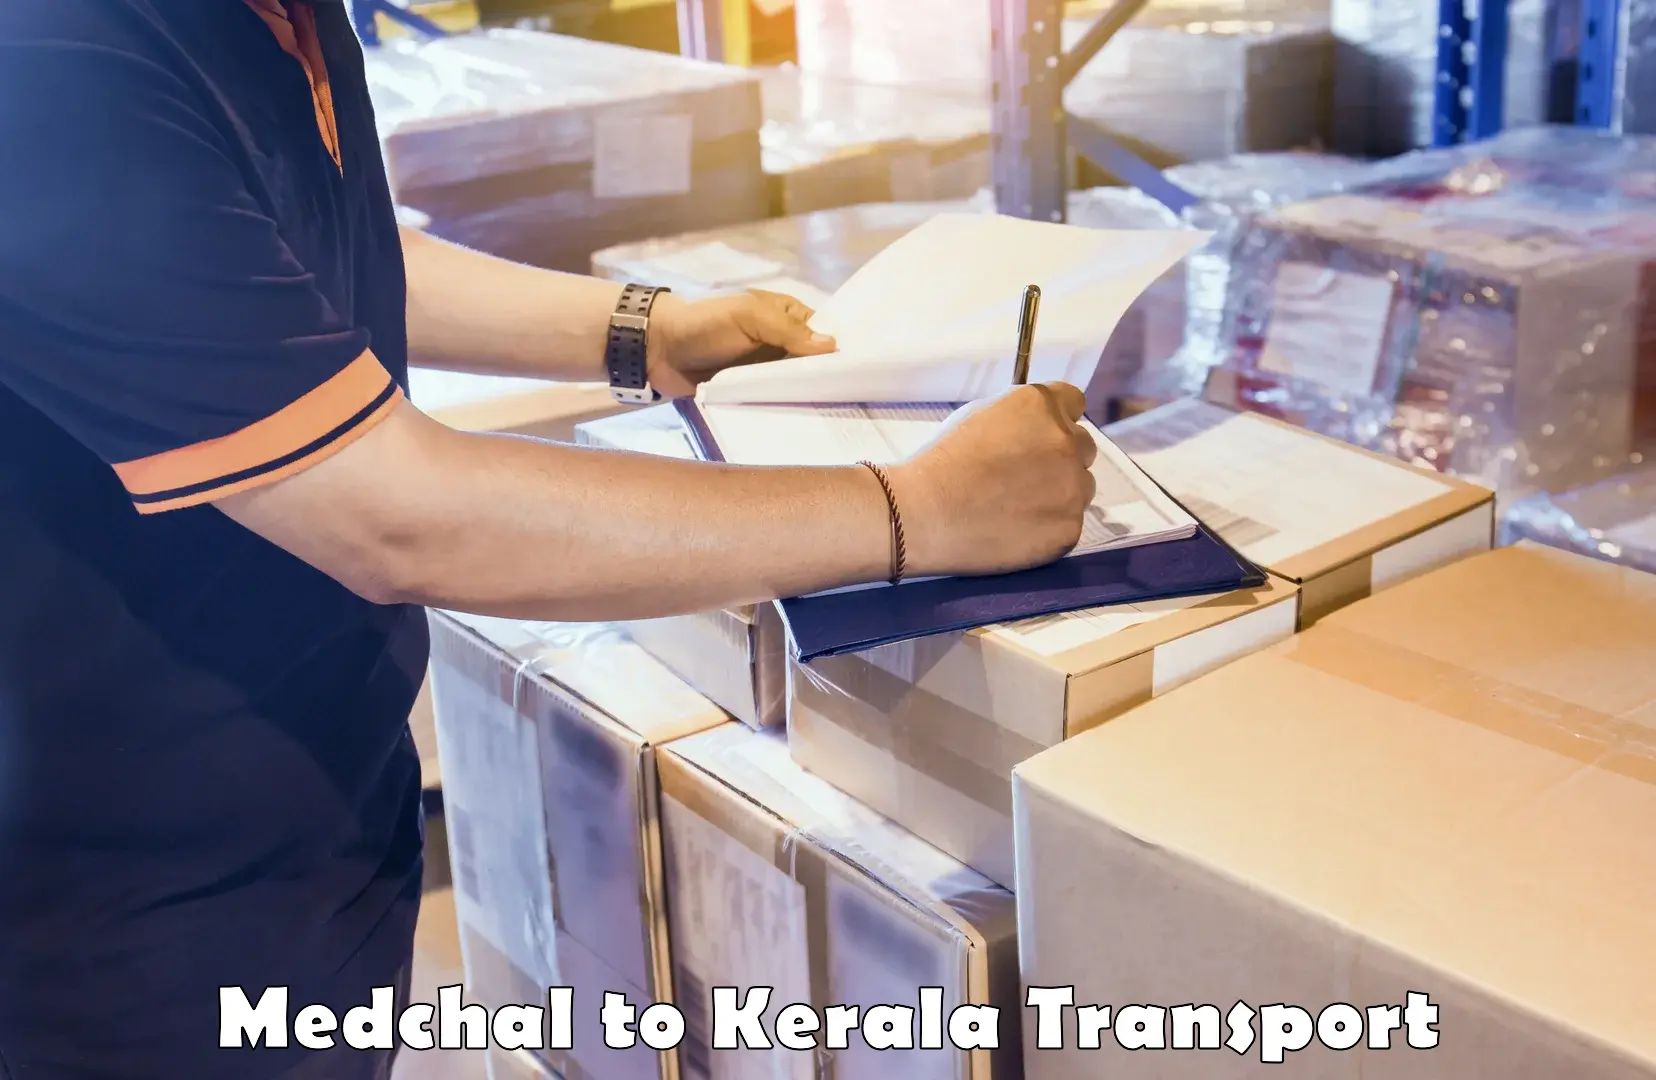 Transport bike from one state to another Medchal to Cochin Port Kochi